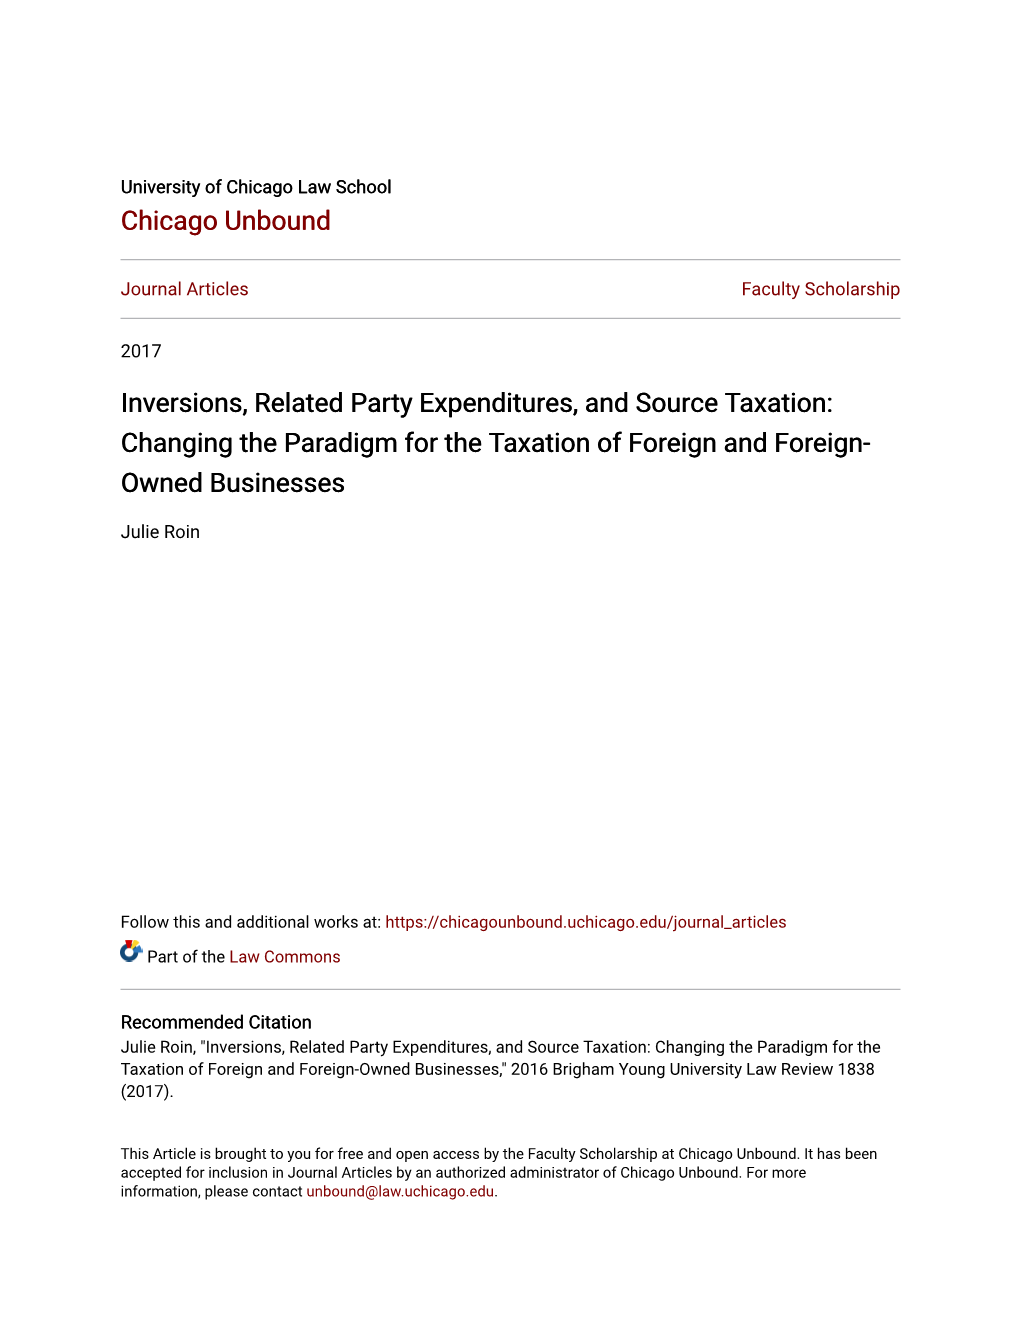 Inversions, Related Party Expenditures, and Source Taxation: Changing the Paradigm for the Taxation of Foreign and Foreign- Owned Businesses